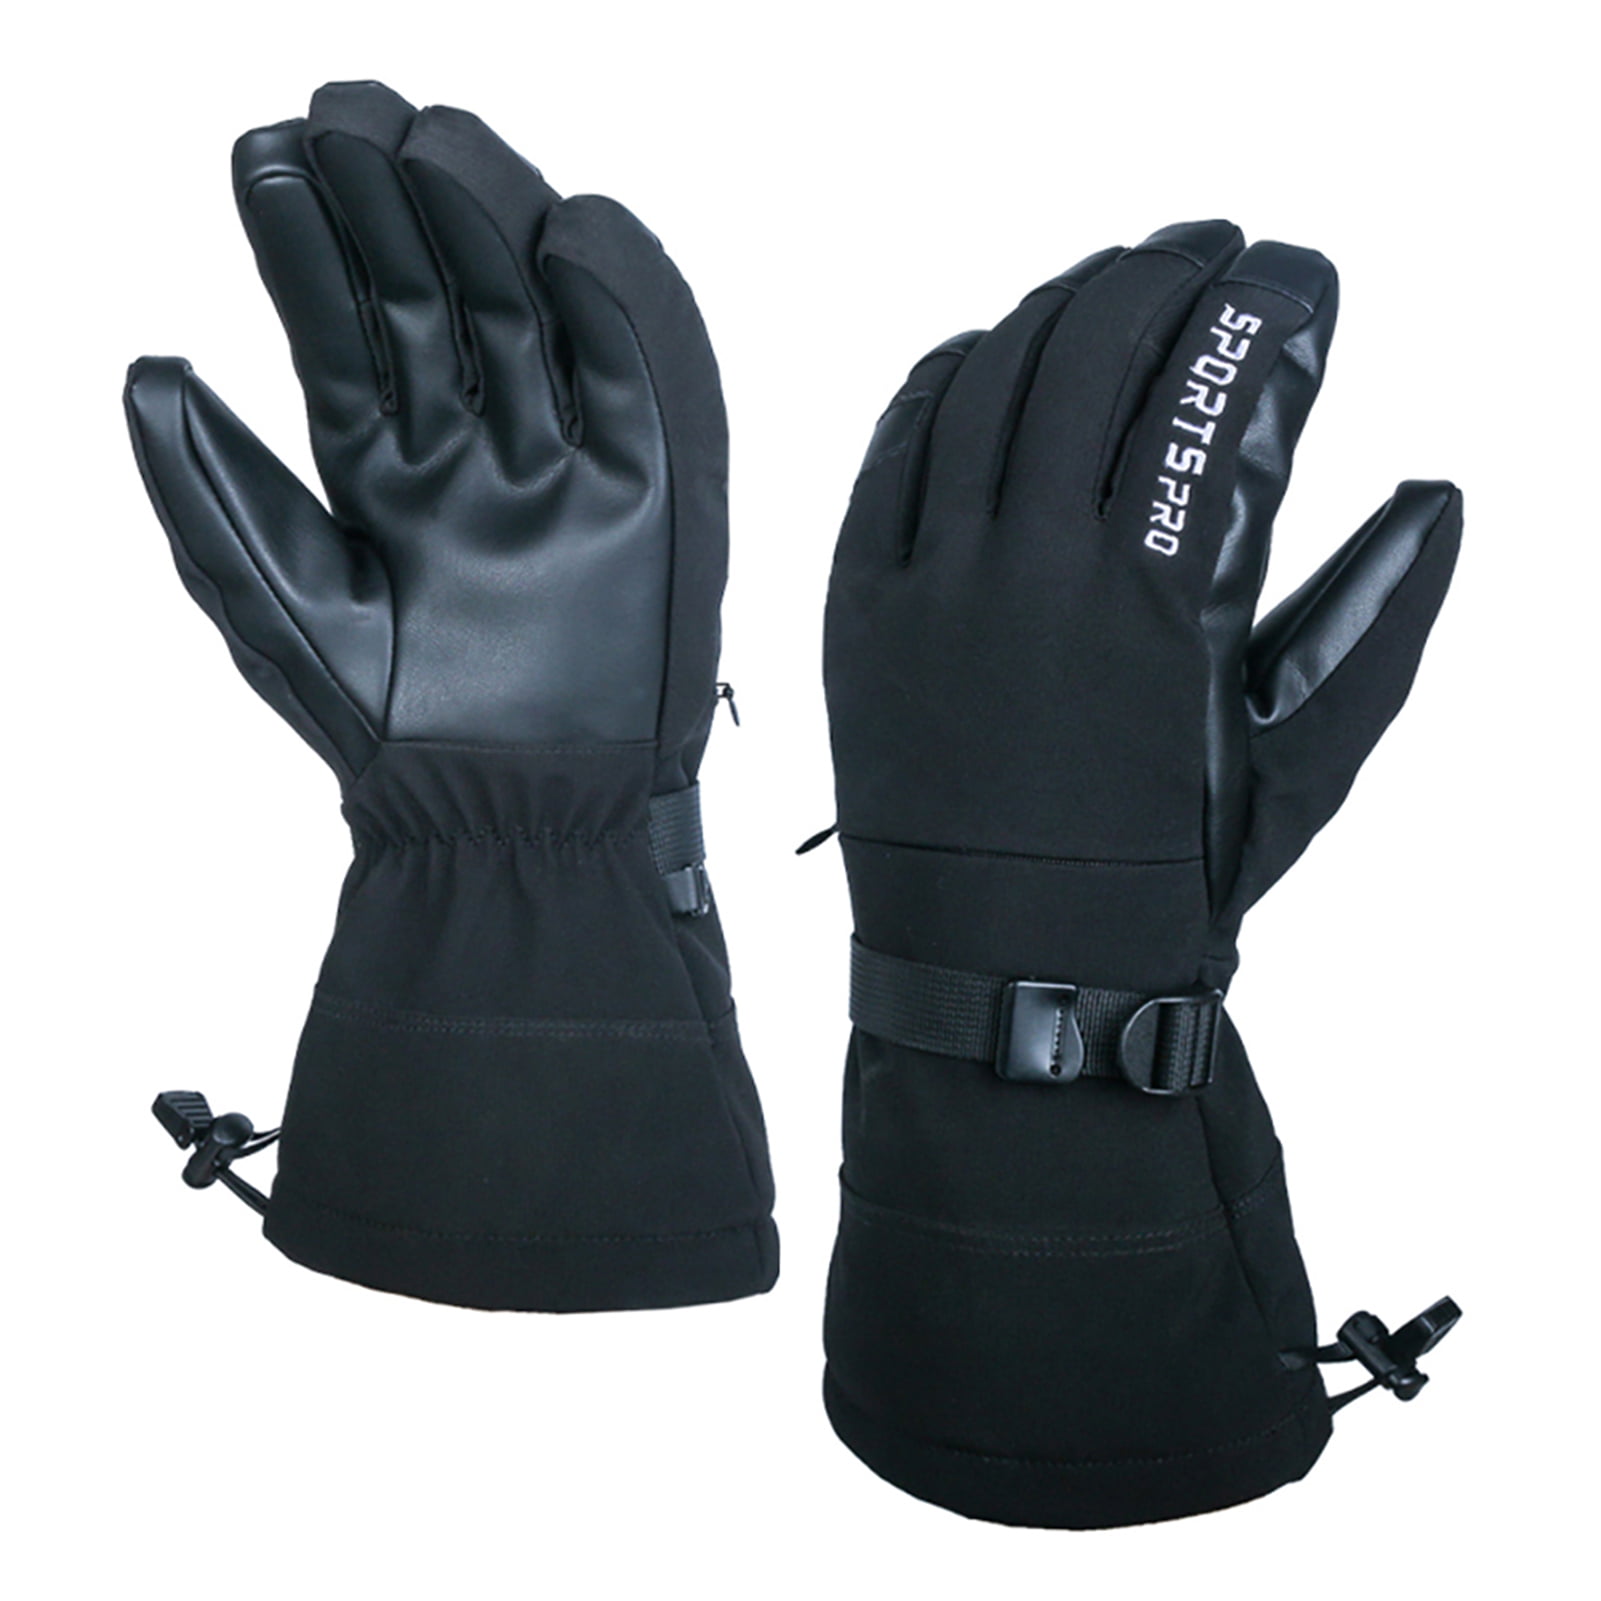 Details about   Thermal Touch Screen Gloves Ski Running Driving Winter Outdoor Sports Gloves 